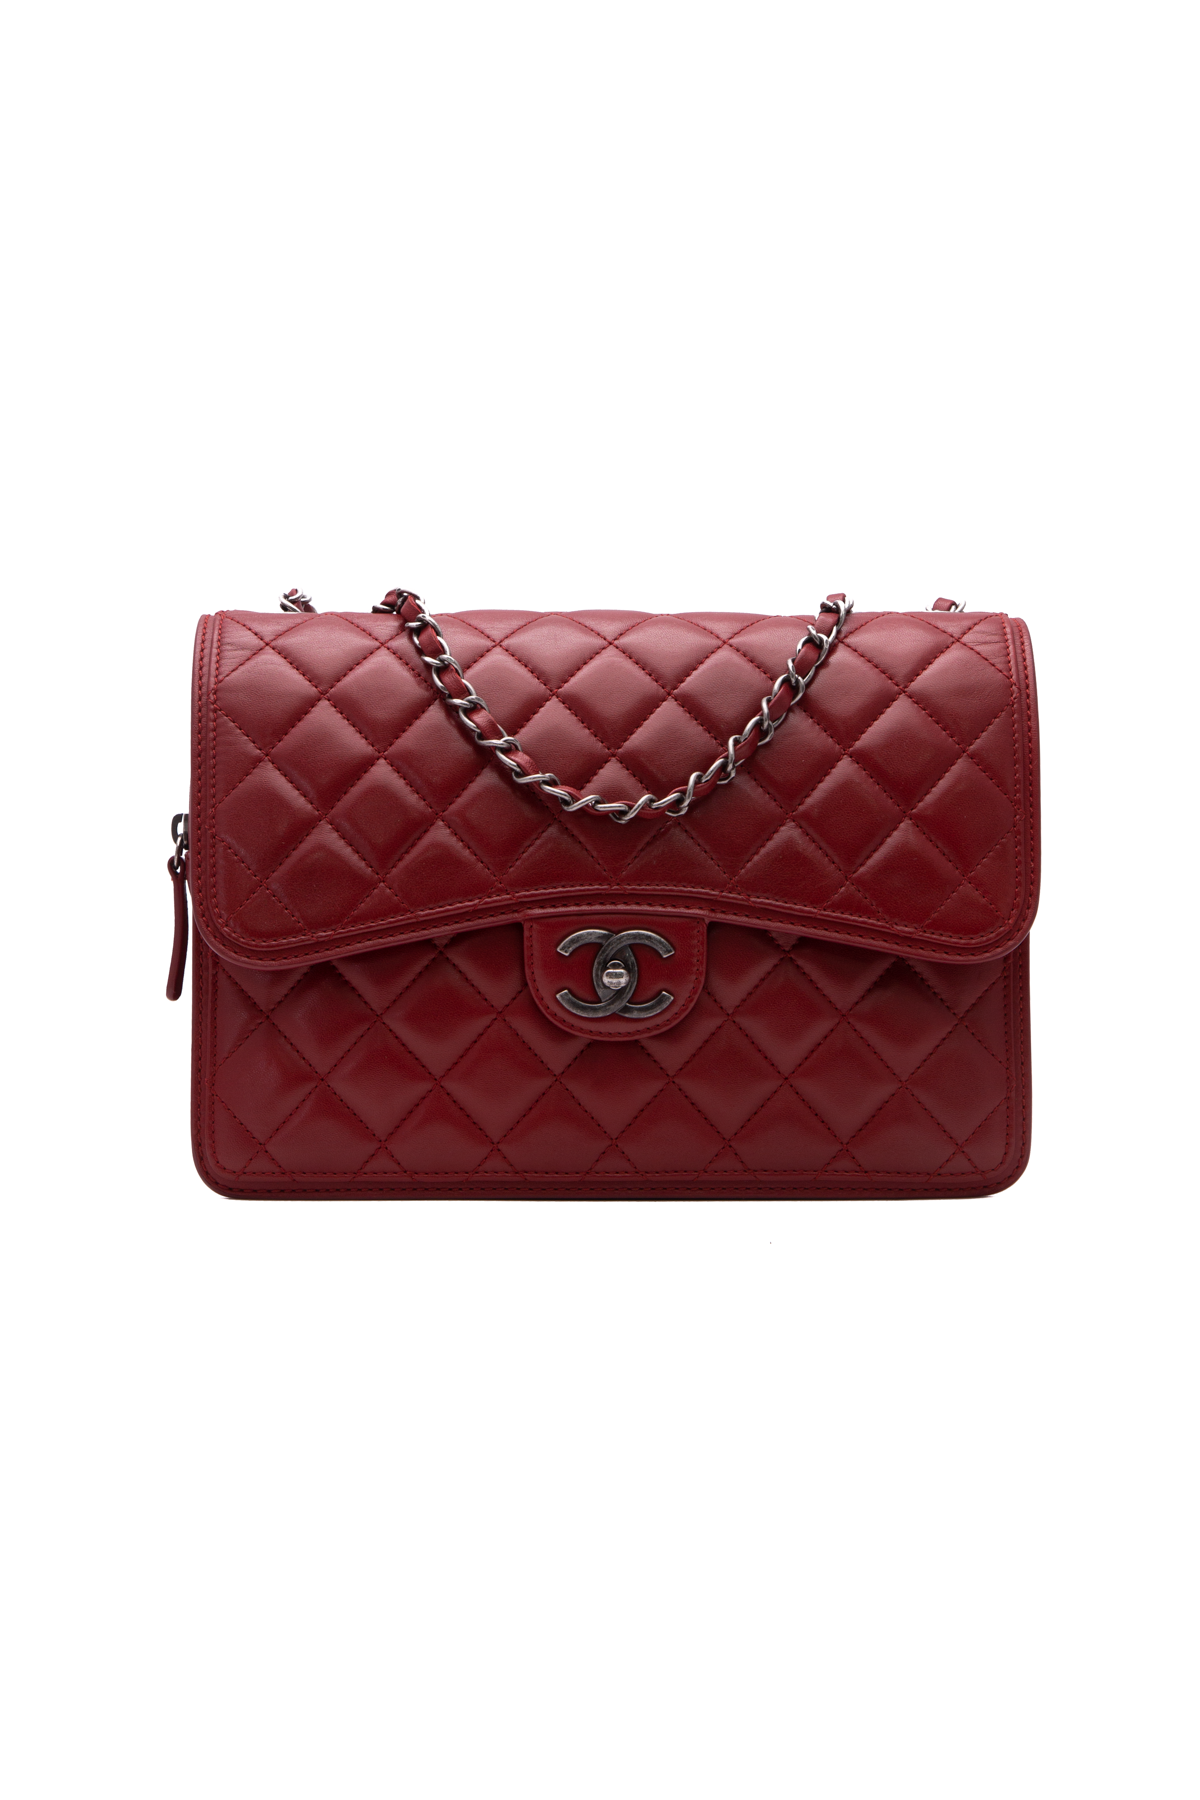 Chanel Deep Red Double Flap Bag